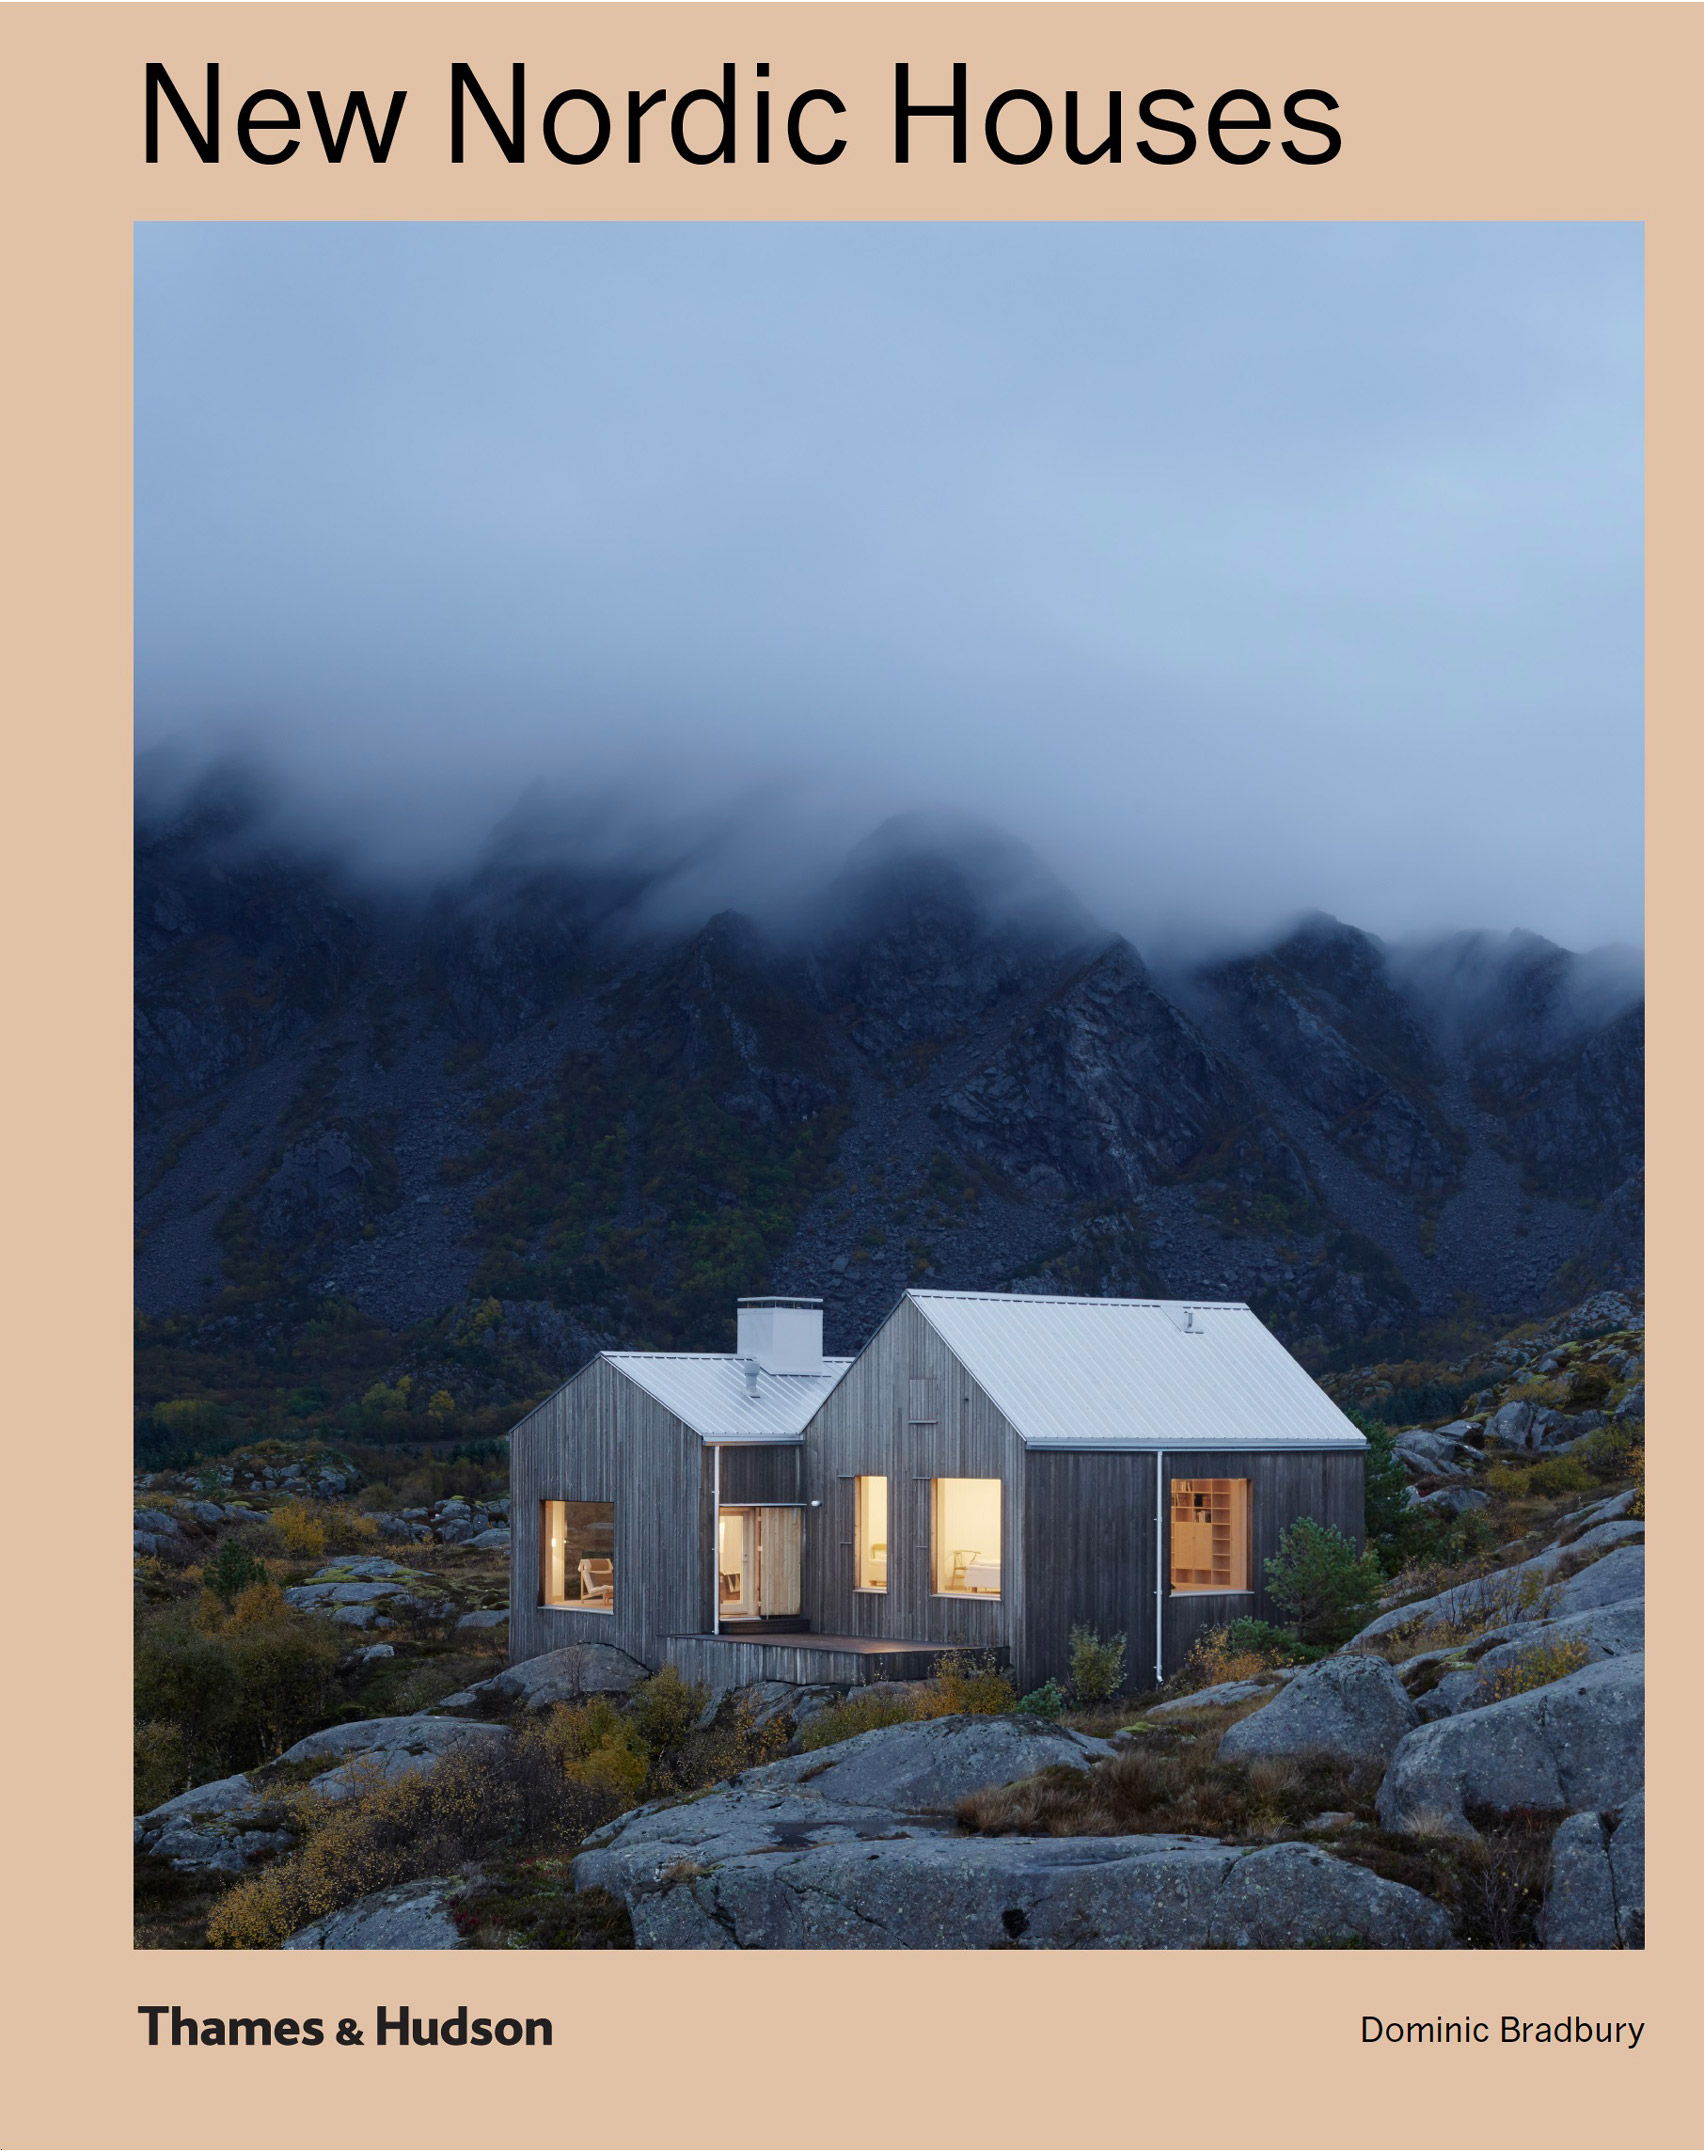 New Nordic Houses by Dominic Bradbury and Thames & Hudson